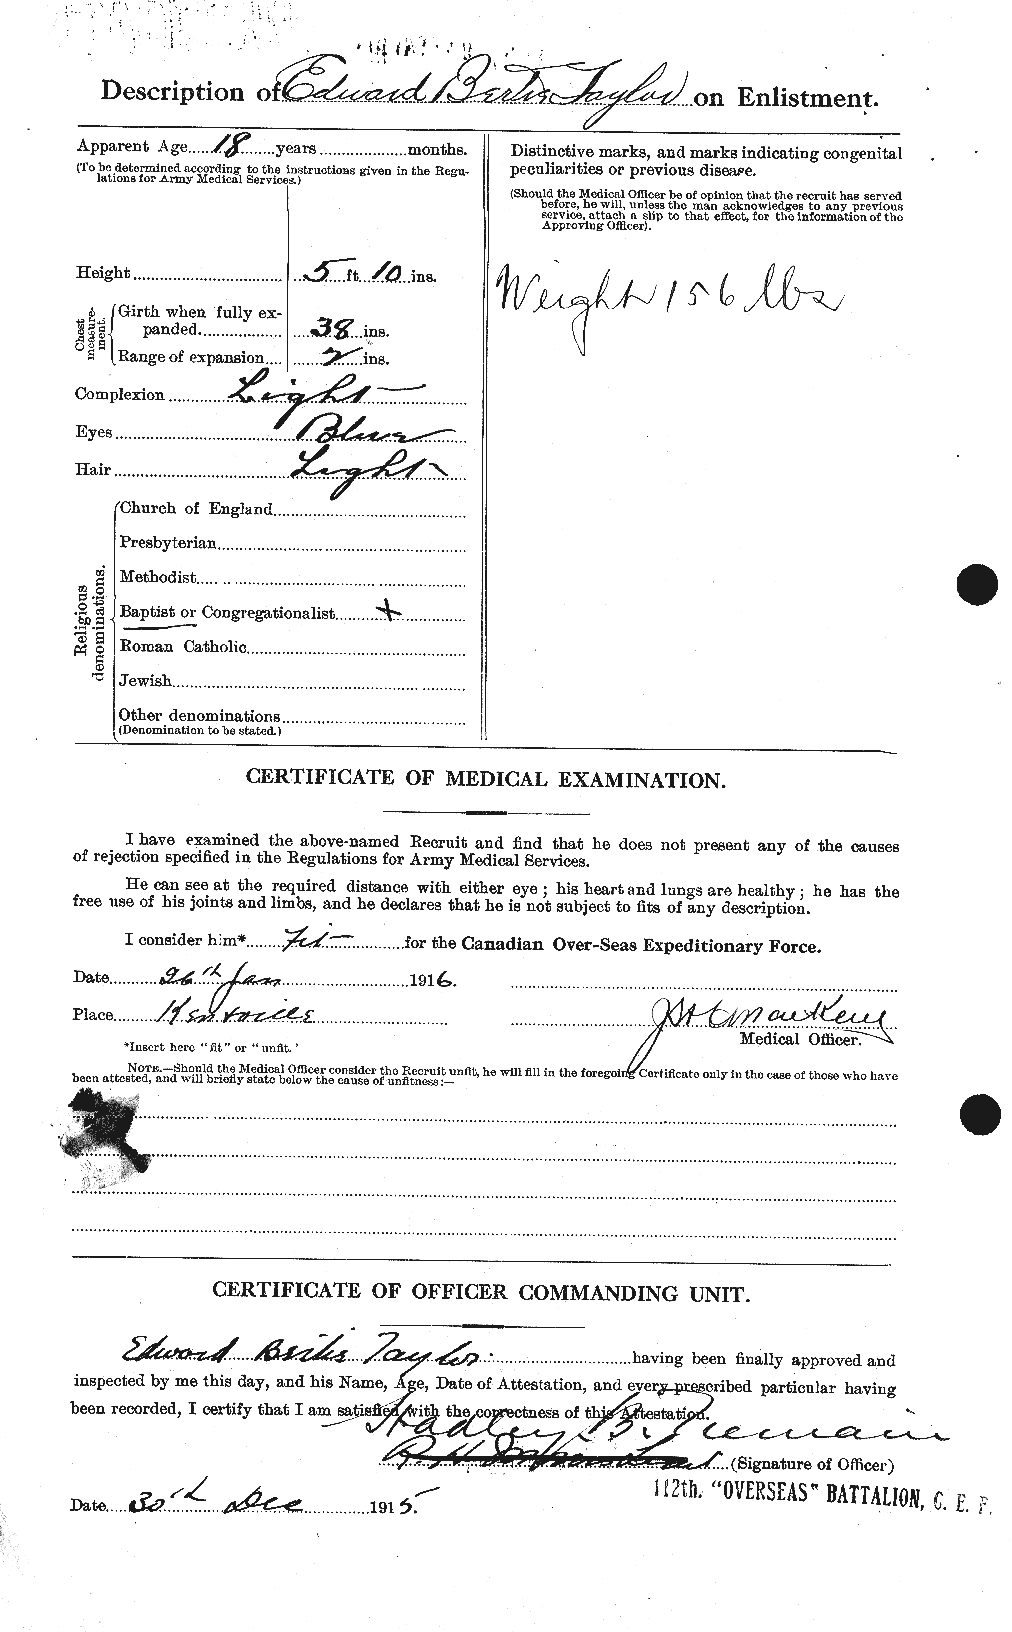 Personnel Records of the First World War - CEF 627302b